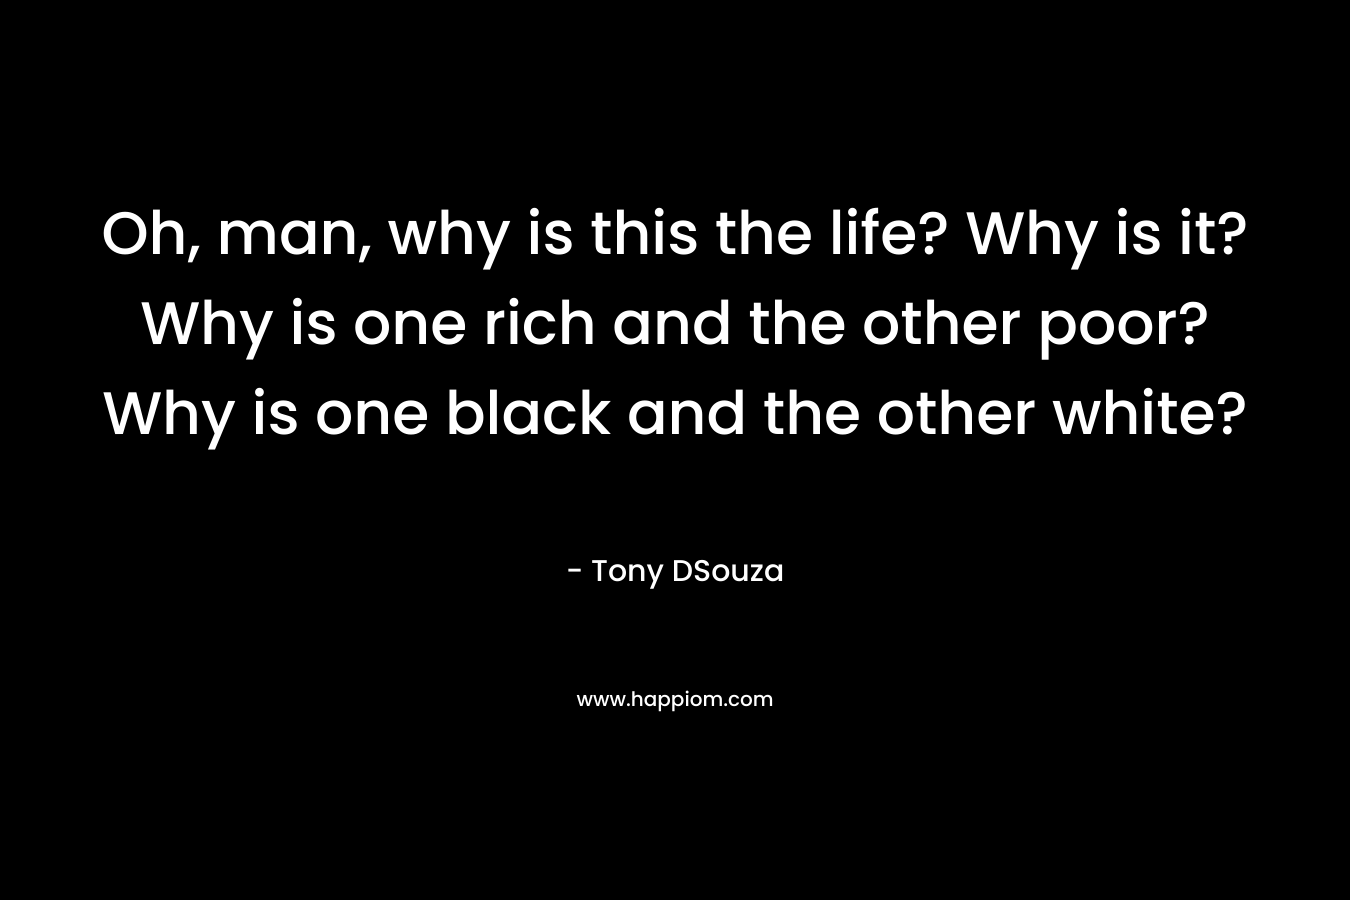 Oh, man, why is this the life? Why is it? Why is one rich and the other poor? Why is one black and the other white?